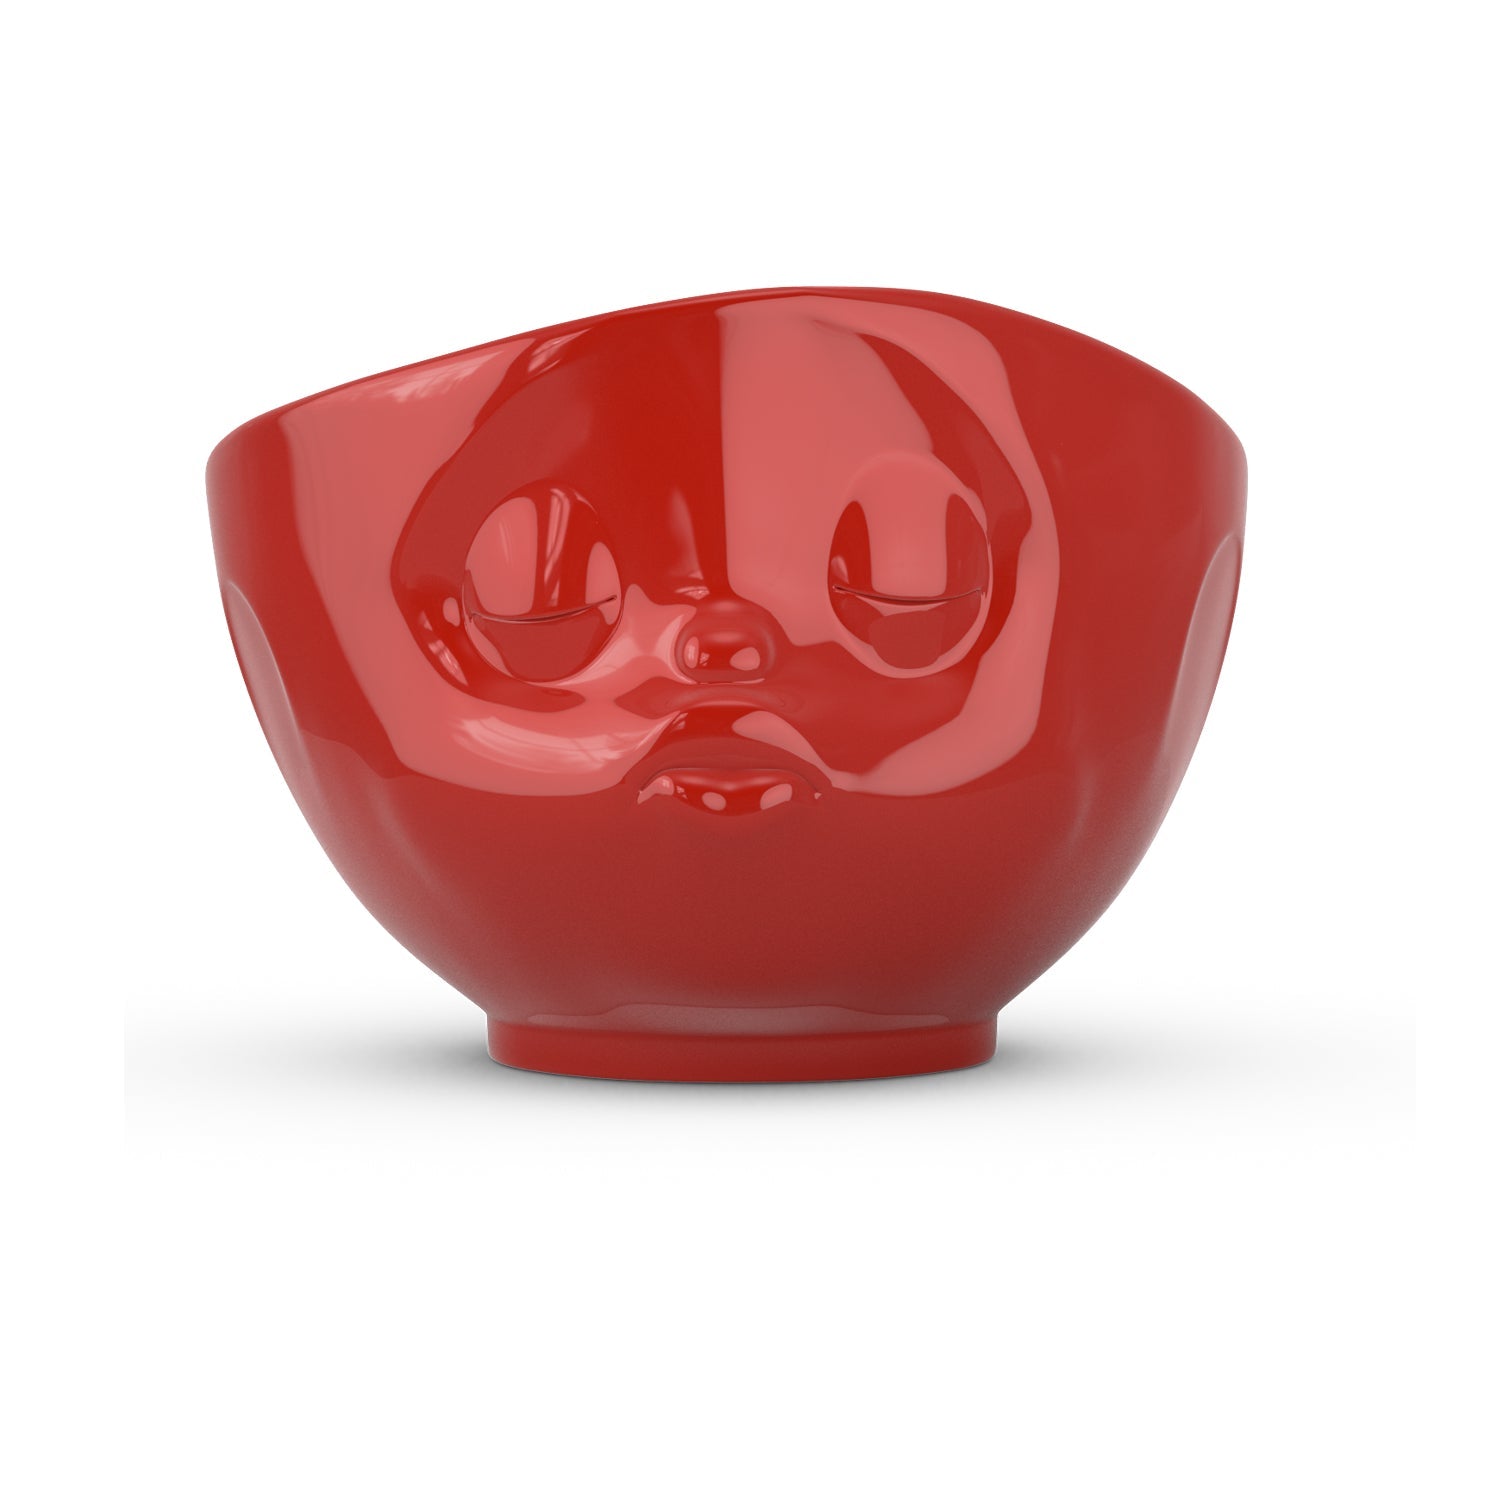 LARGE KISSING RED BOWL